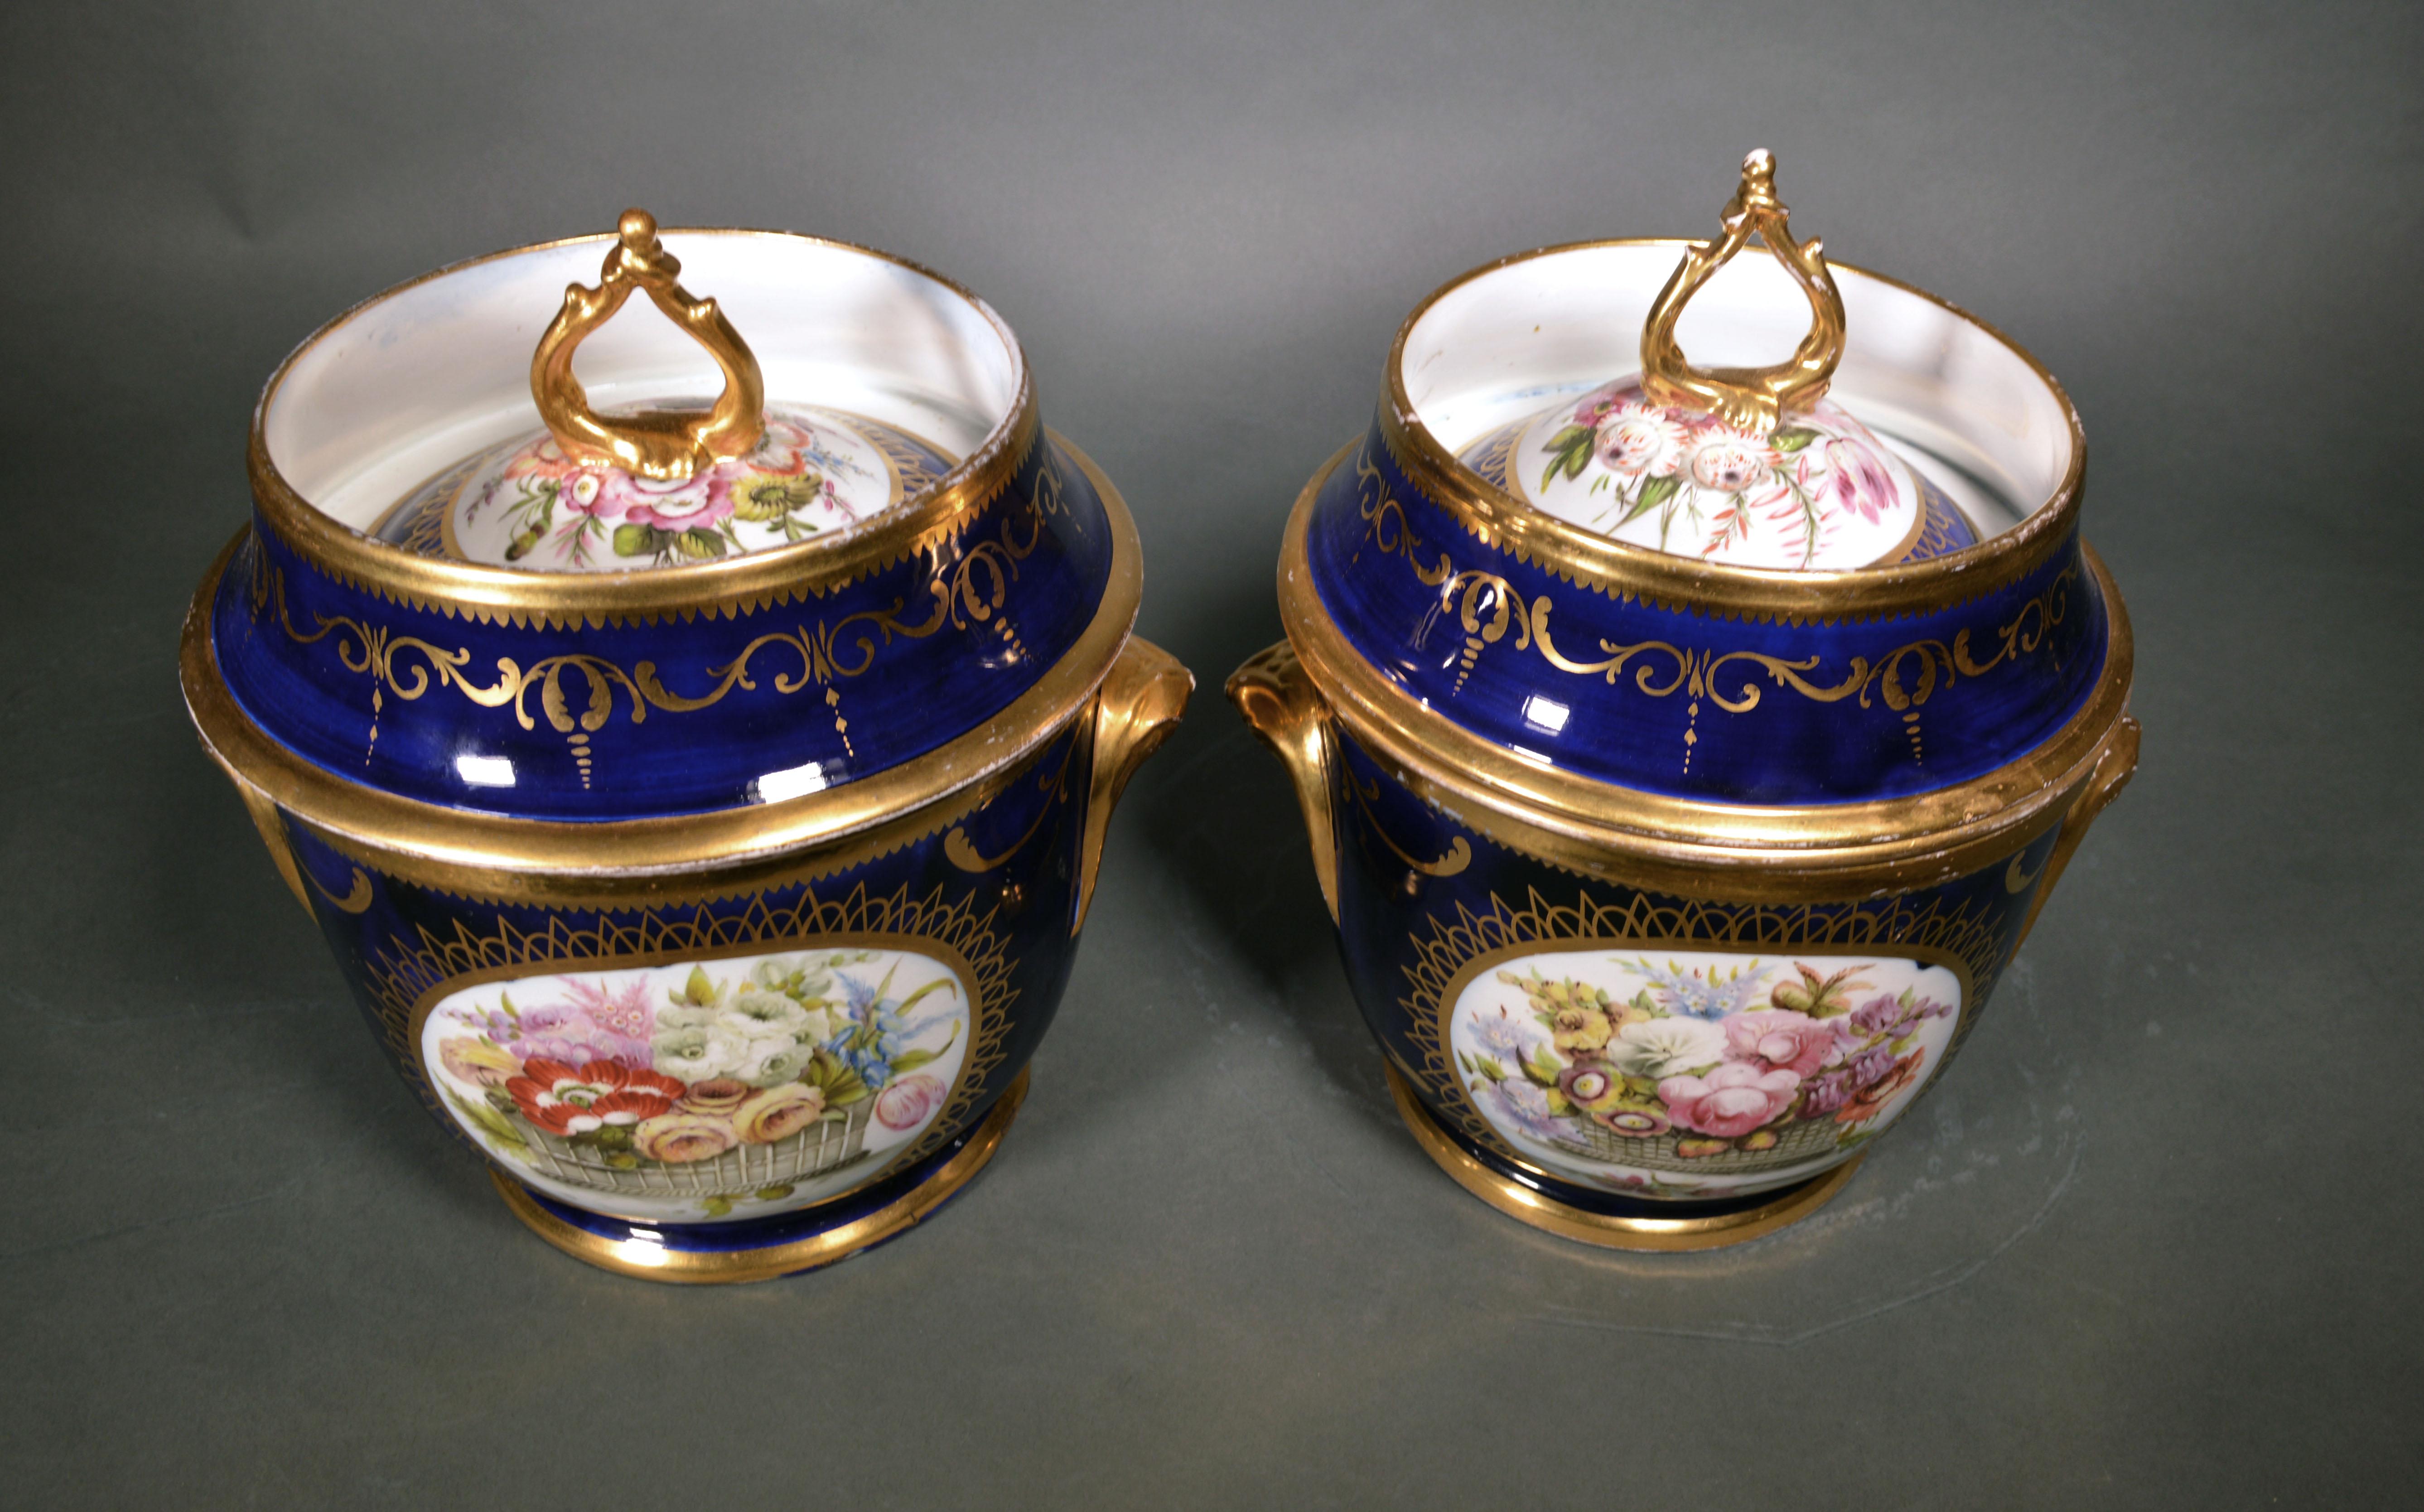 English Porcelain Coalport Pair of Botanical Fruit Coolers, Covers, and Liners 2